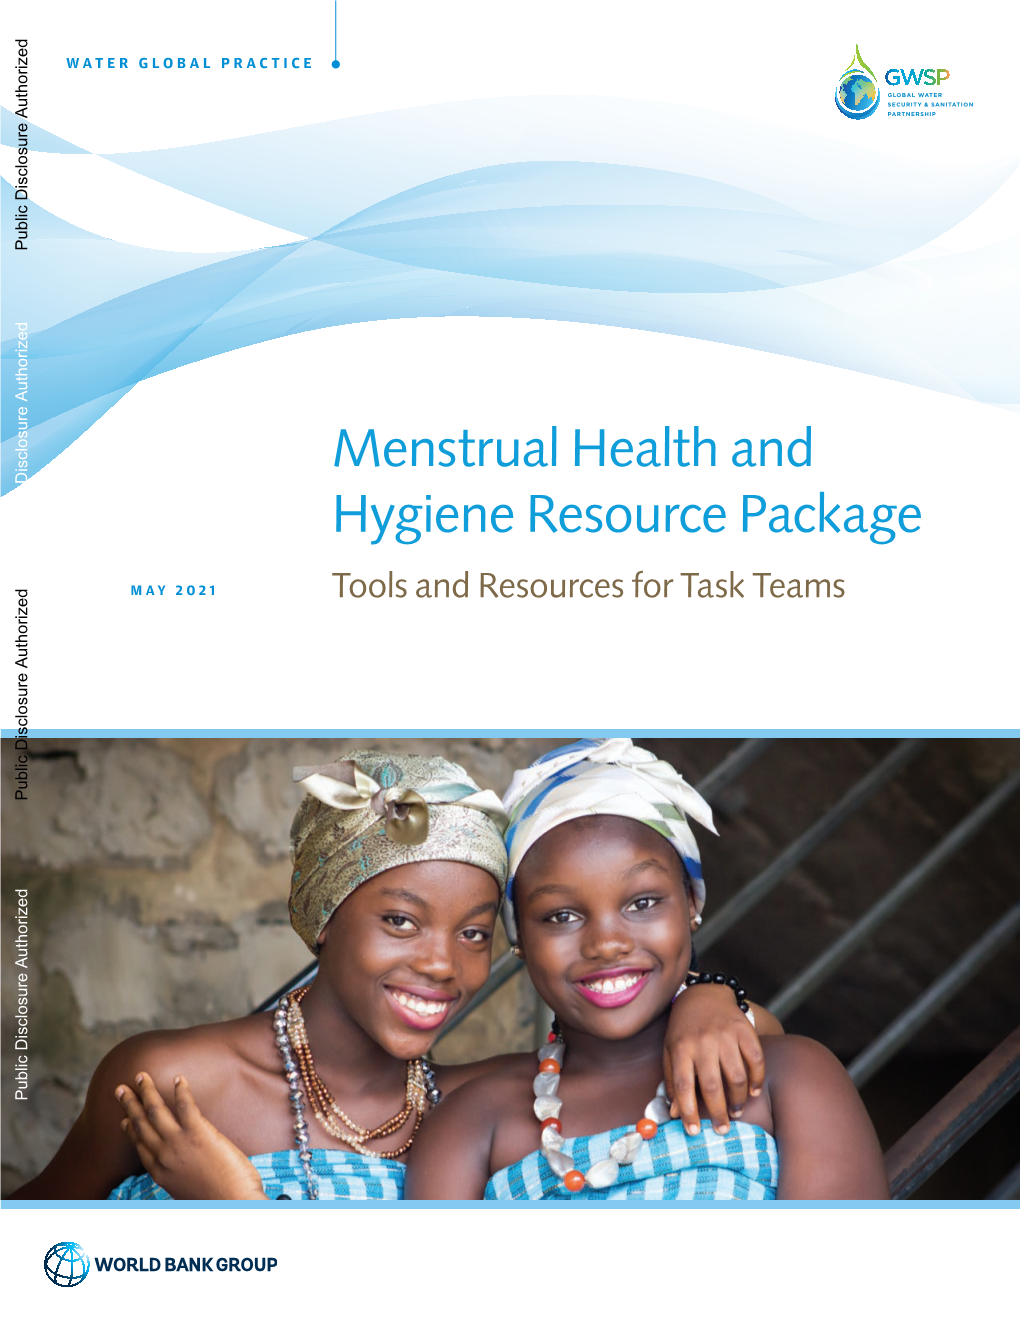 Menstrual Health and Hygiene Resource Package